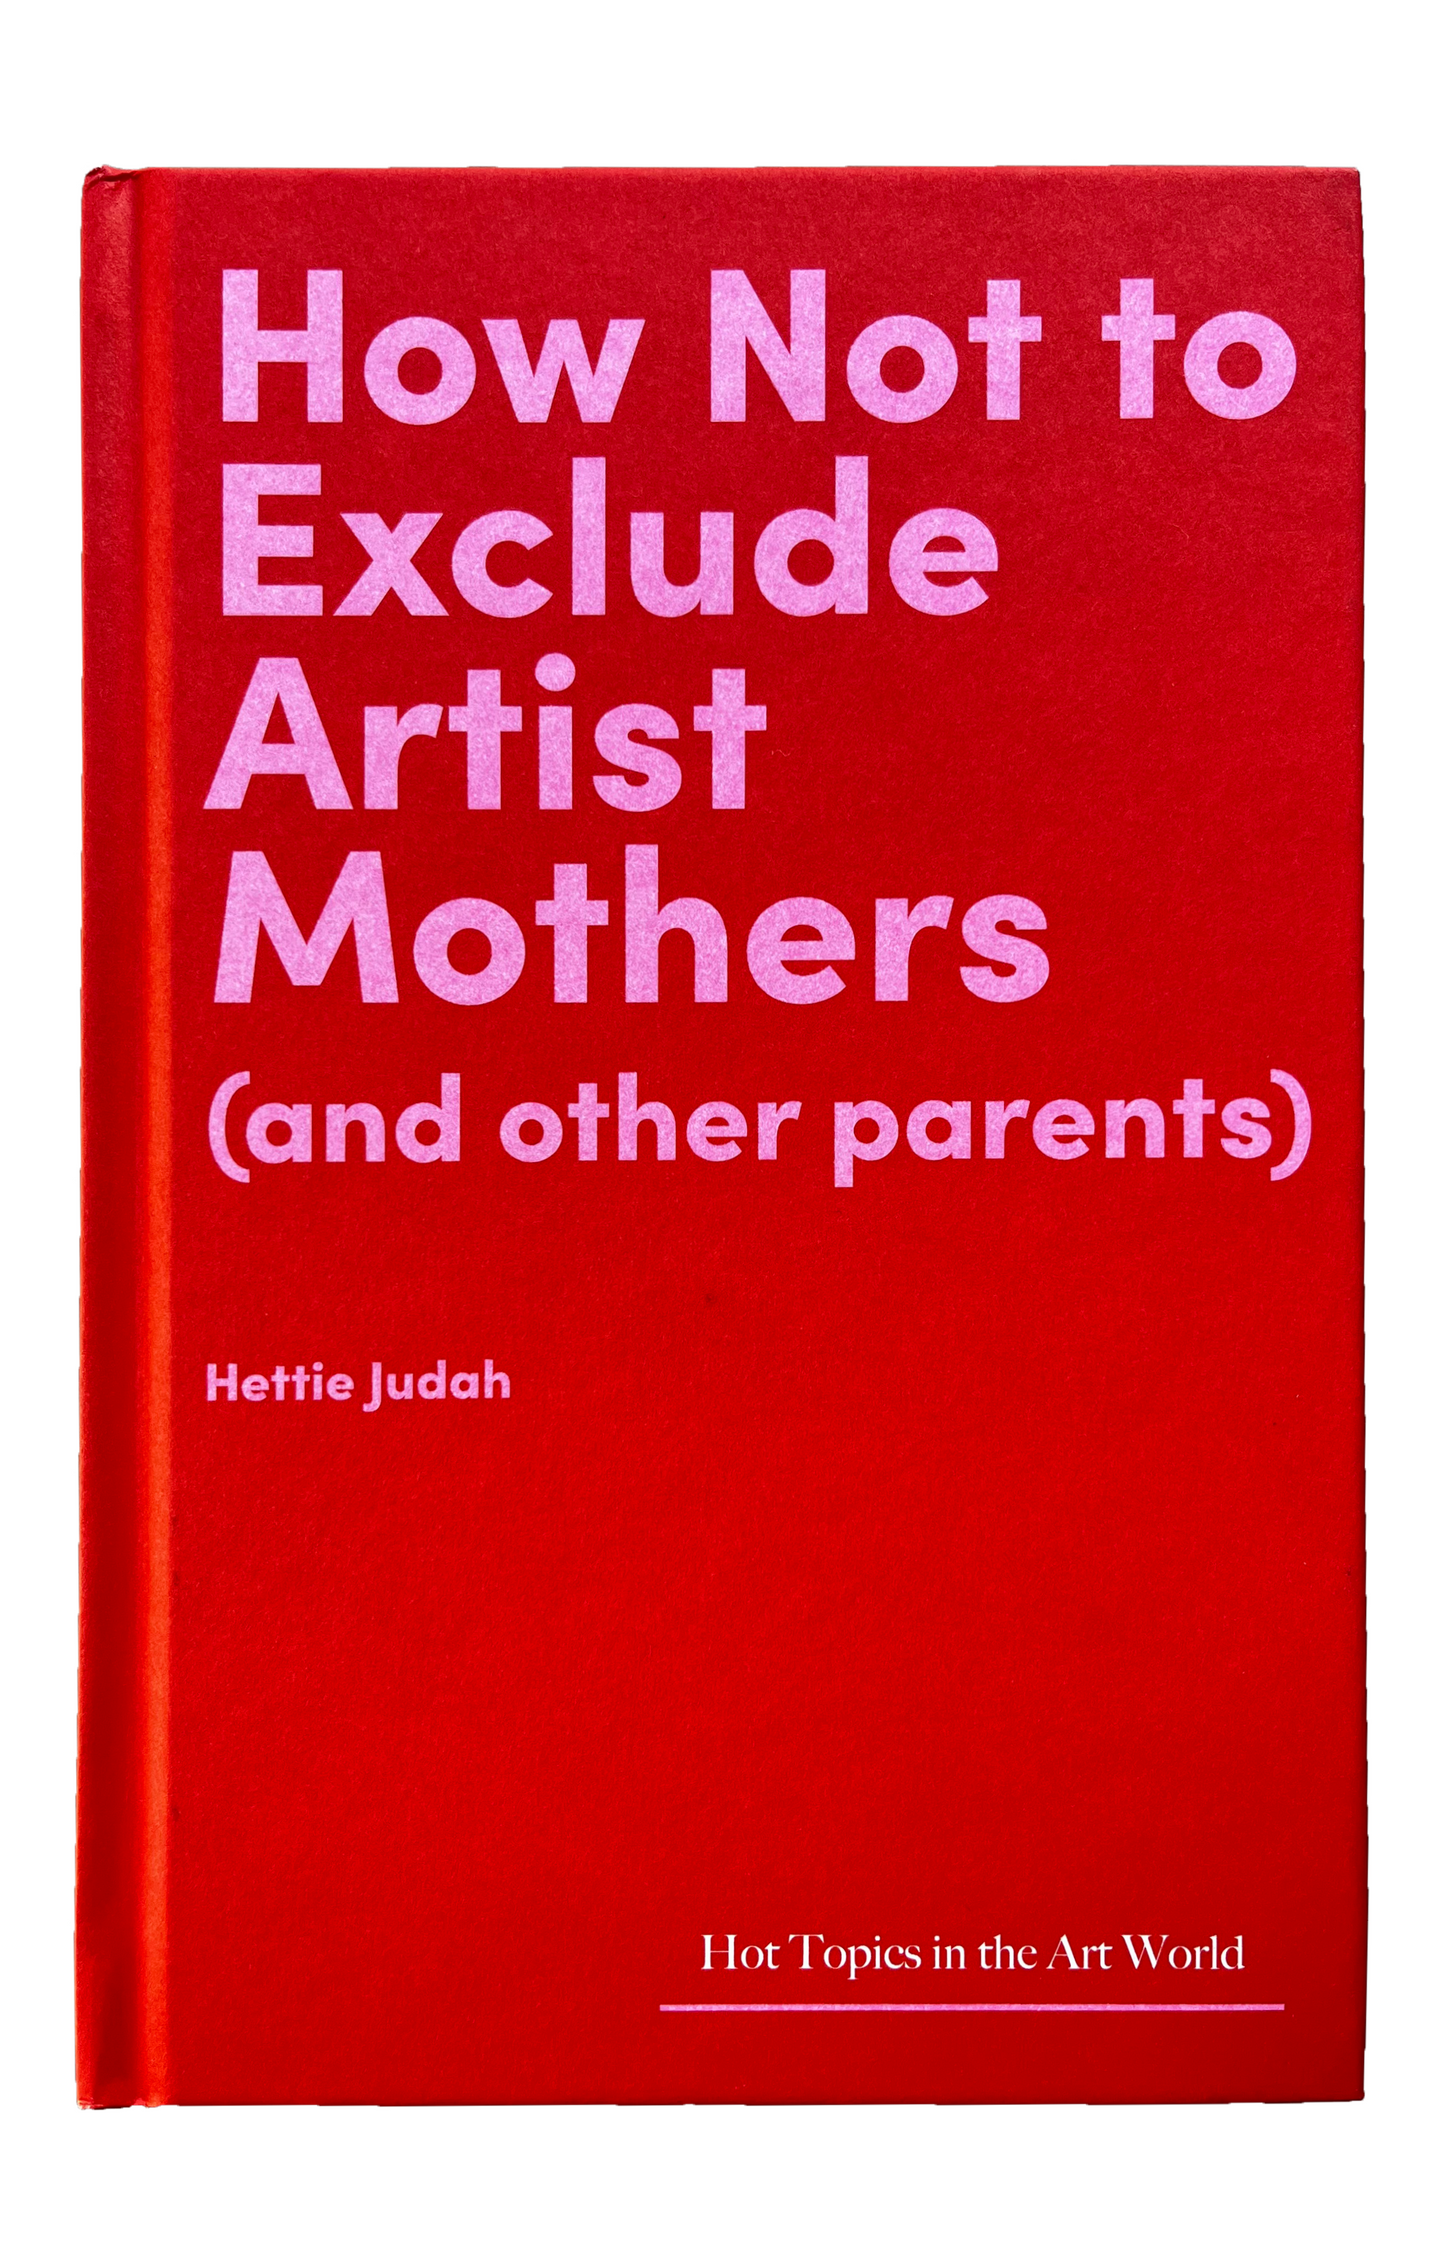 How Not To Exclude Artist Mothers (and other parents) - Hettie Judah